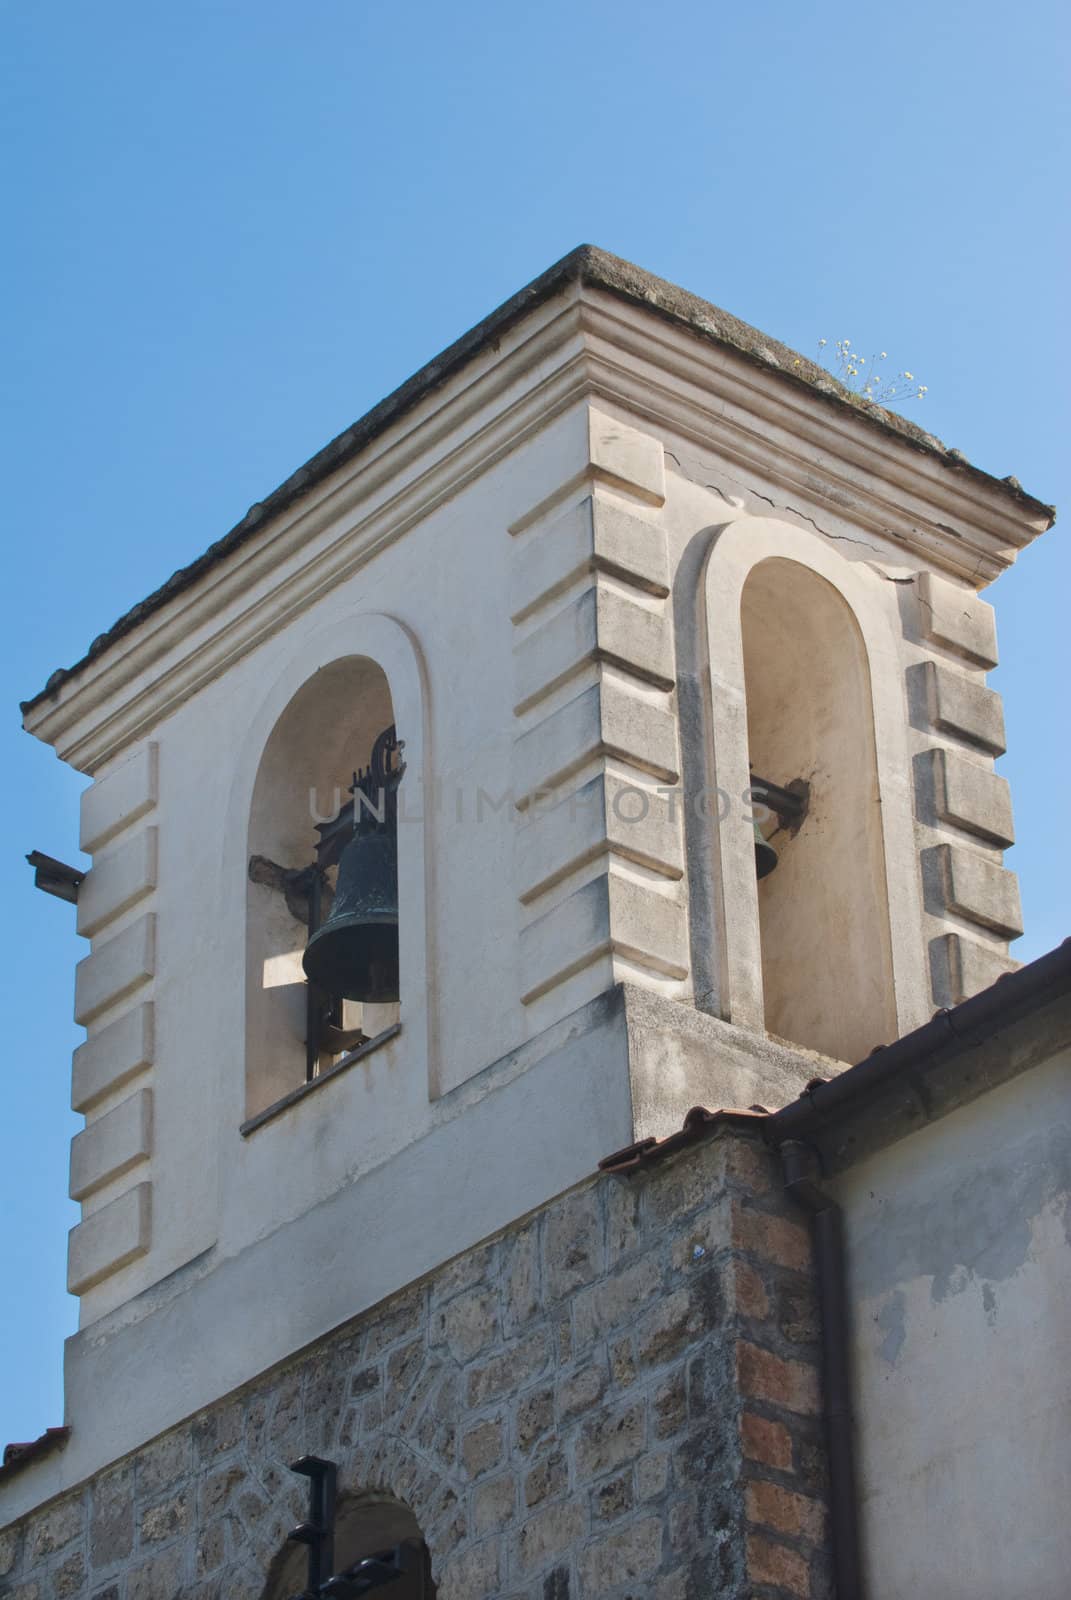 Bell tower for church, Sorrento Italy